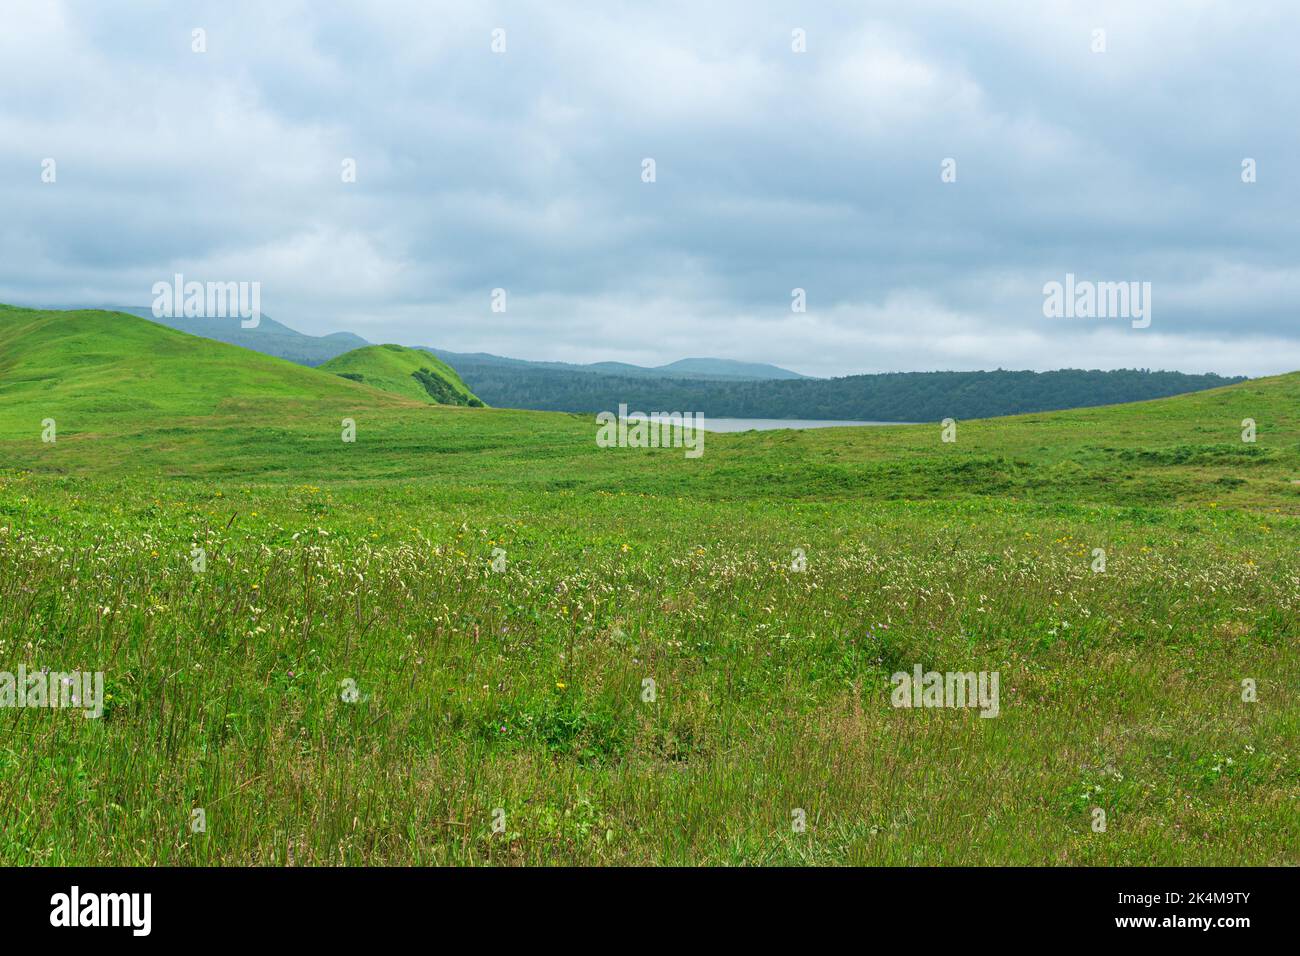 beautiful landscape of Kunashir island with grassy hills and distant lake Stock Photo